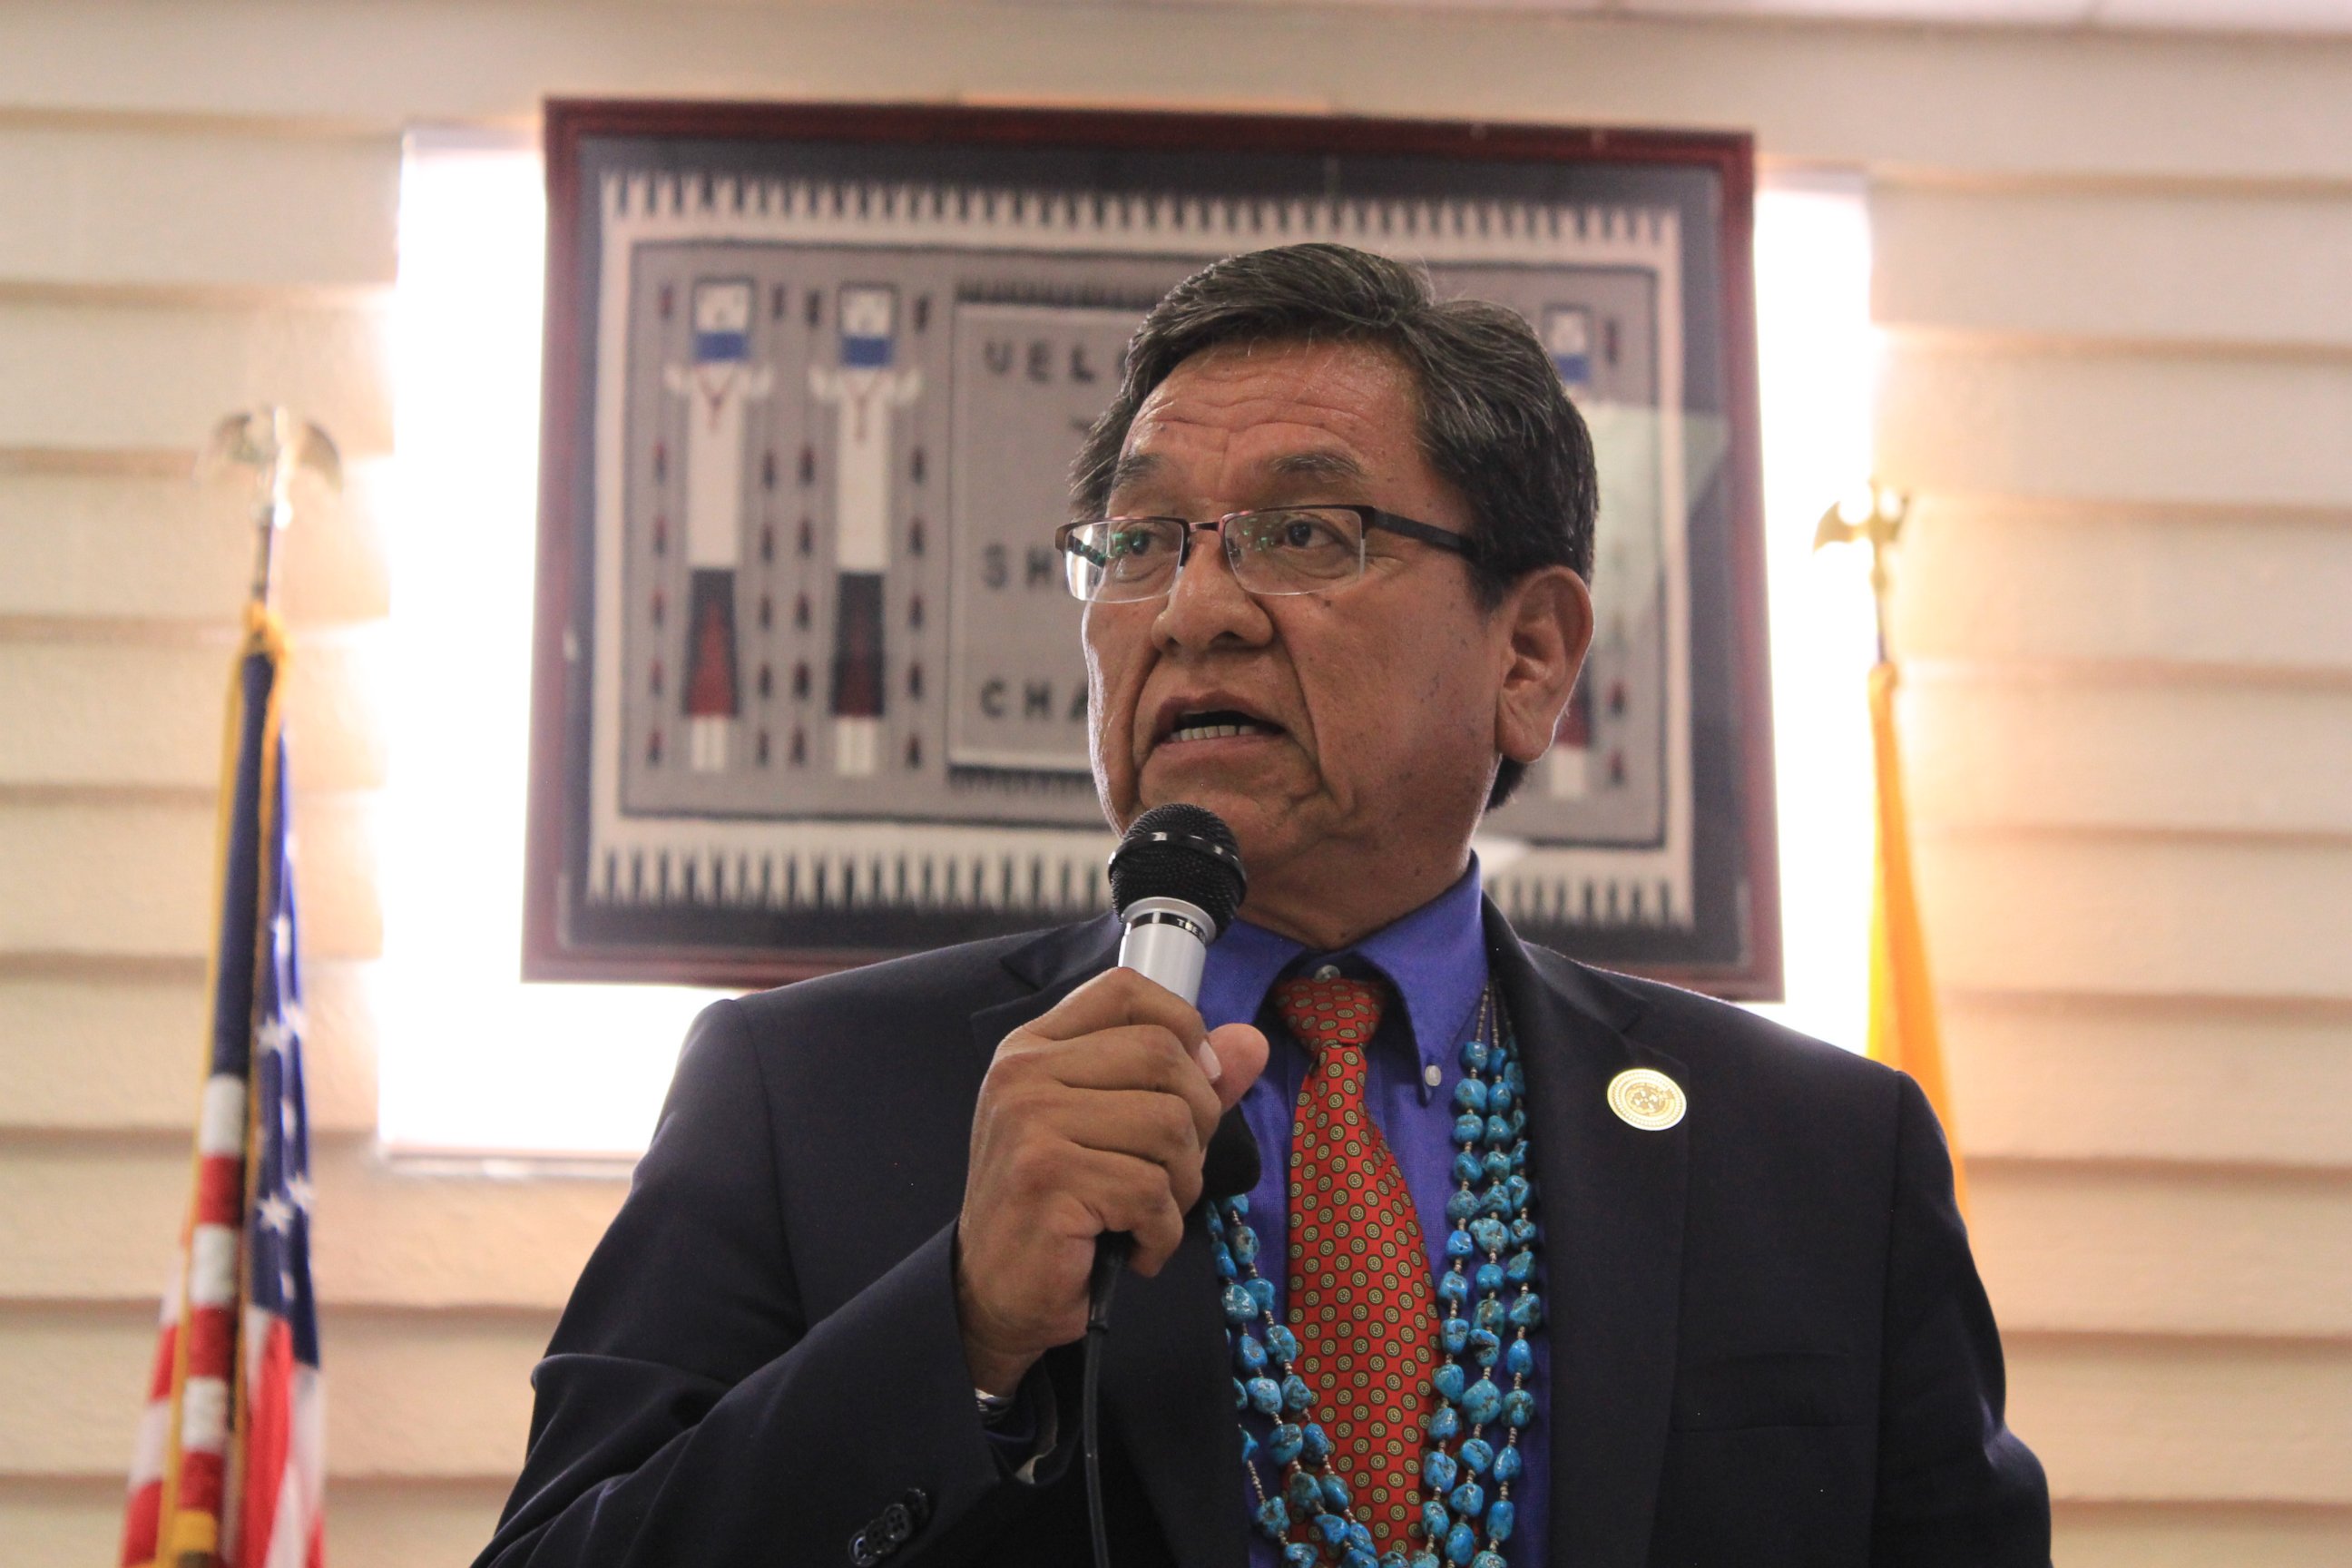 PHOTO: Navajo Nation President Russell Begaye makes an announcement on Aug. 8, 2015 about the Navajo Nation response to the release of mine waste into the Animas River which has impacted the Navajo Nation water supply.